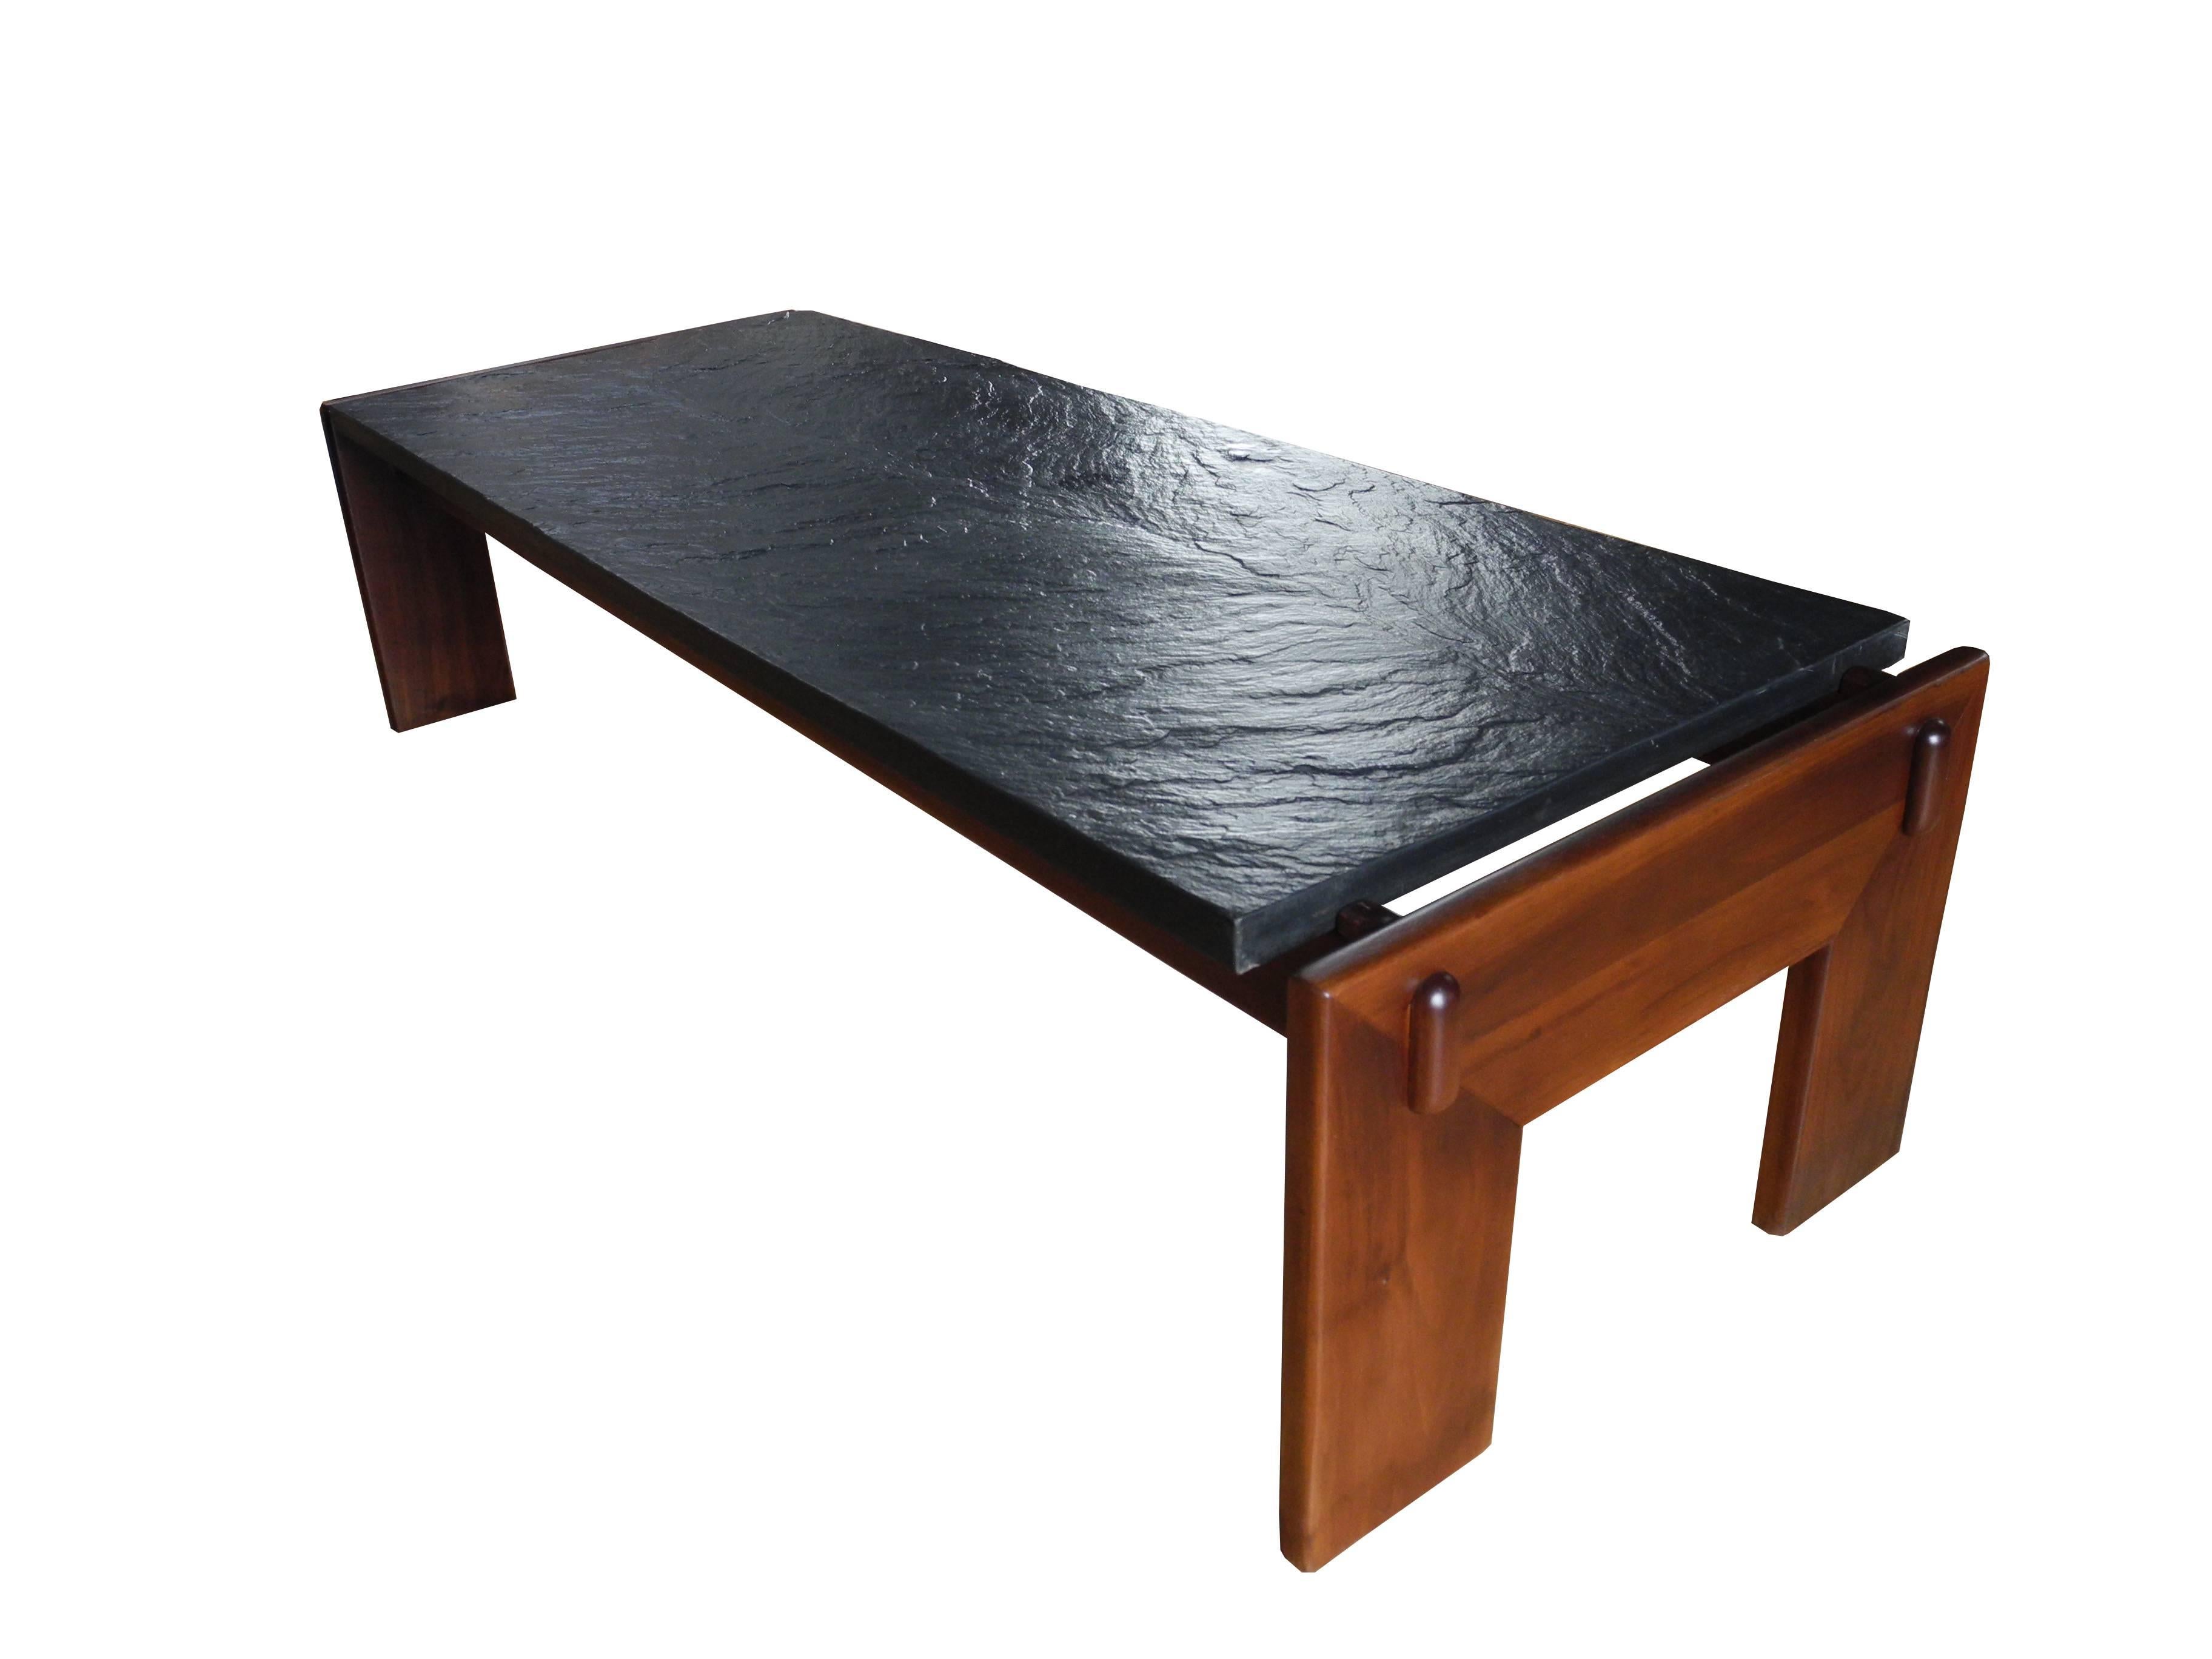 20th Century Mid-Modern Brutalist Slate and Solid Walnut Coffee Table by Adrian Pearsall For Sale